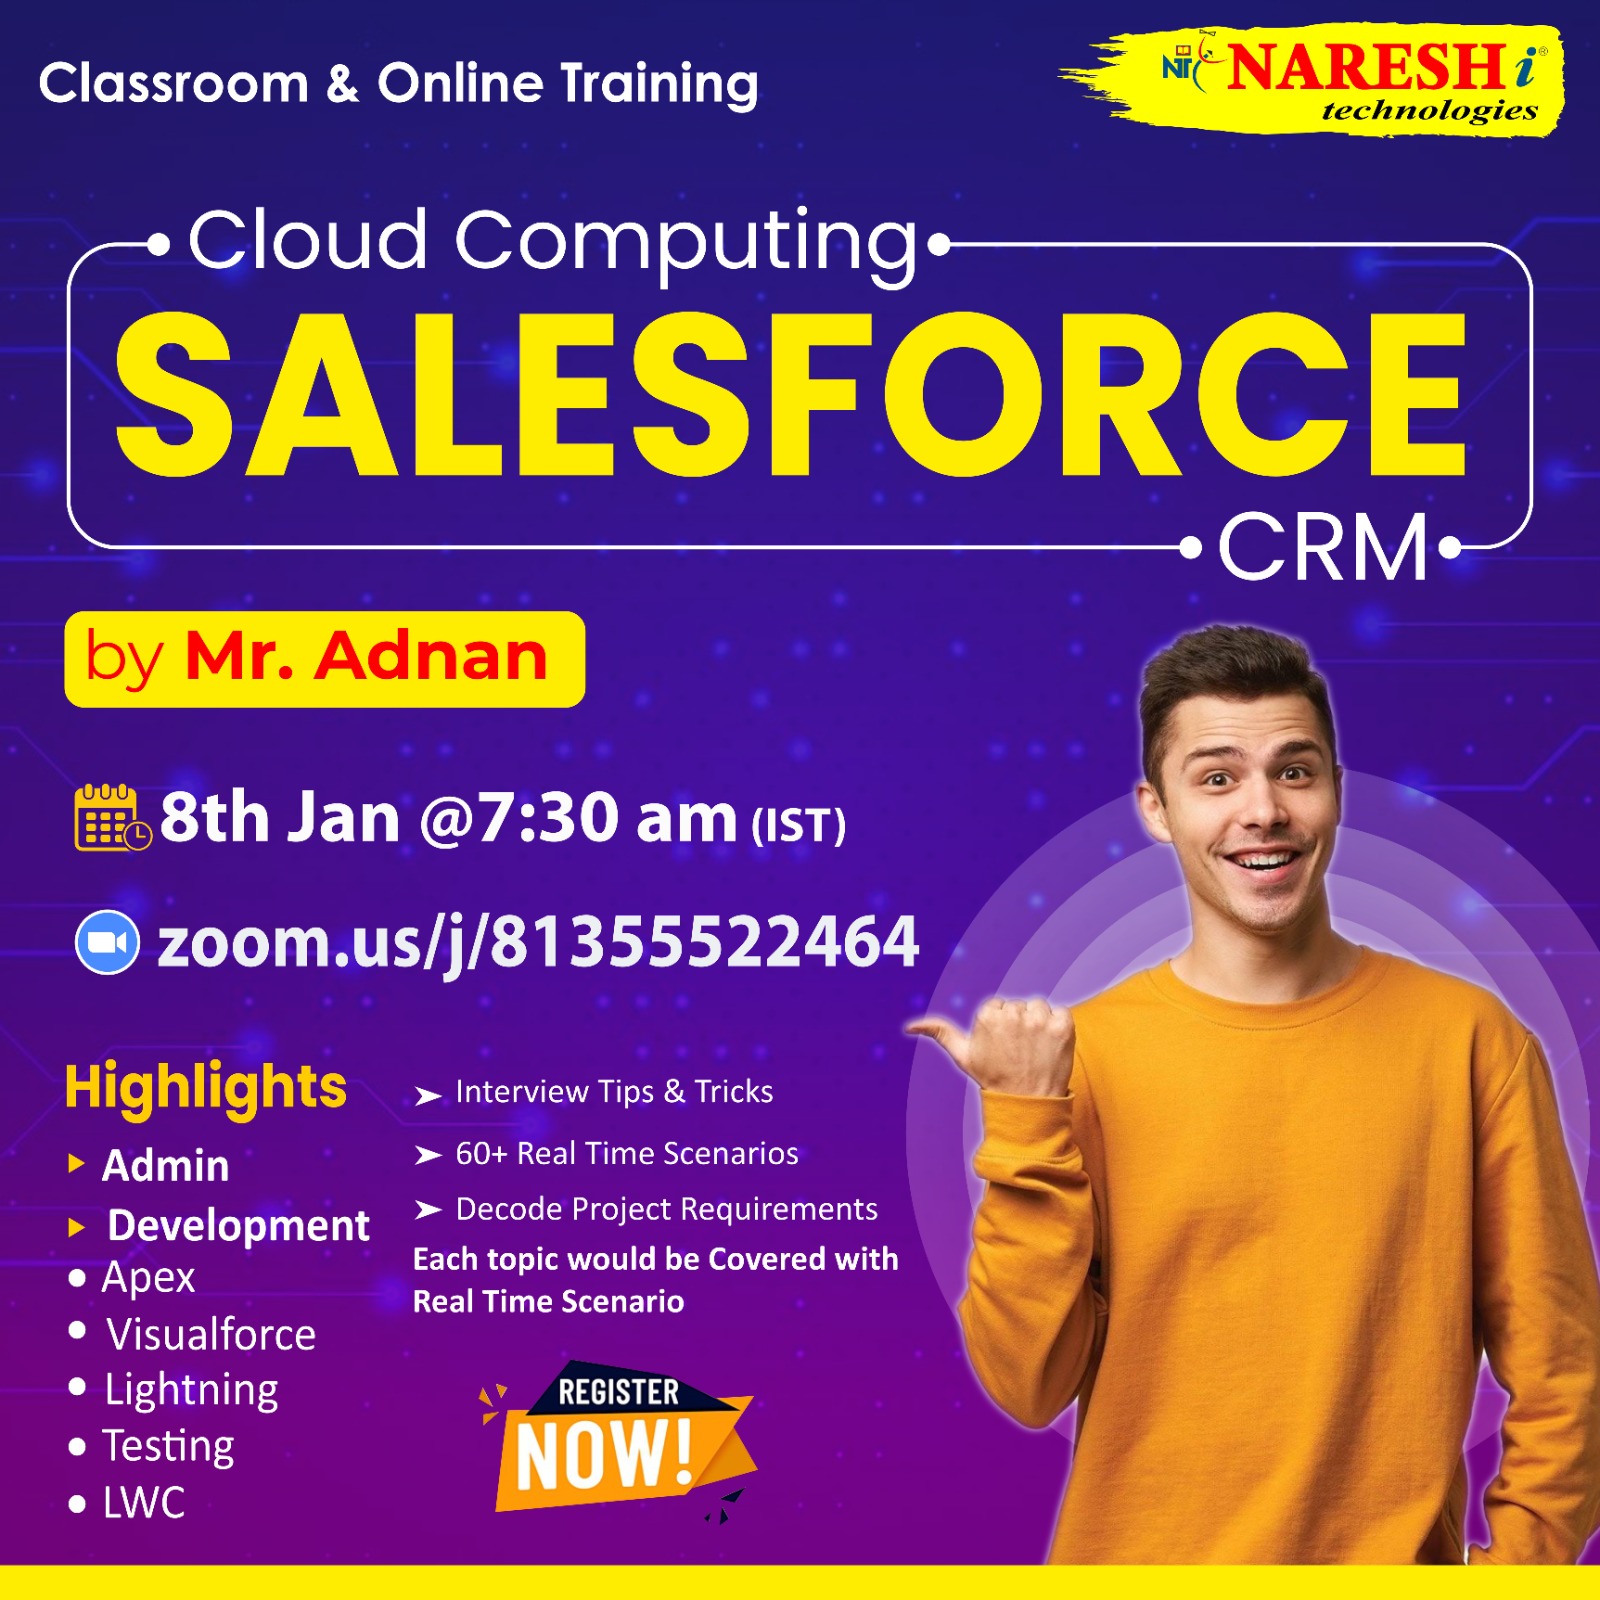 Salesforce Course Training in Hyderabad - Naresh i Technologies, Online Event